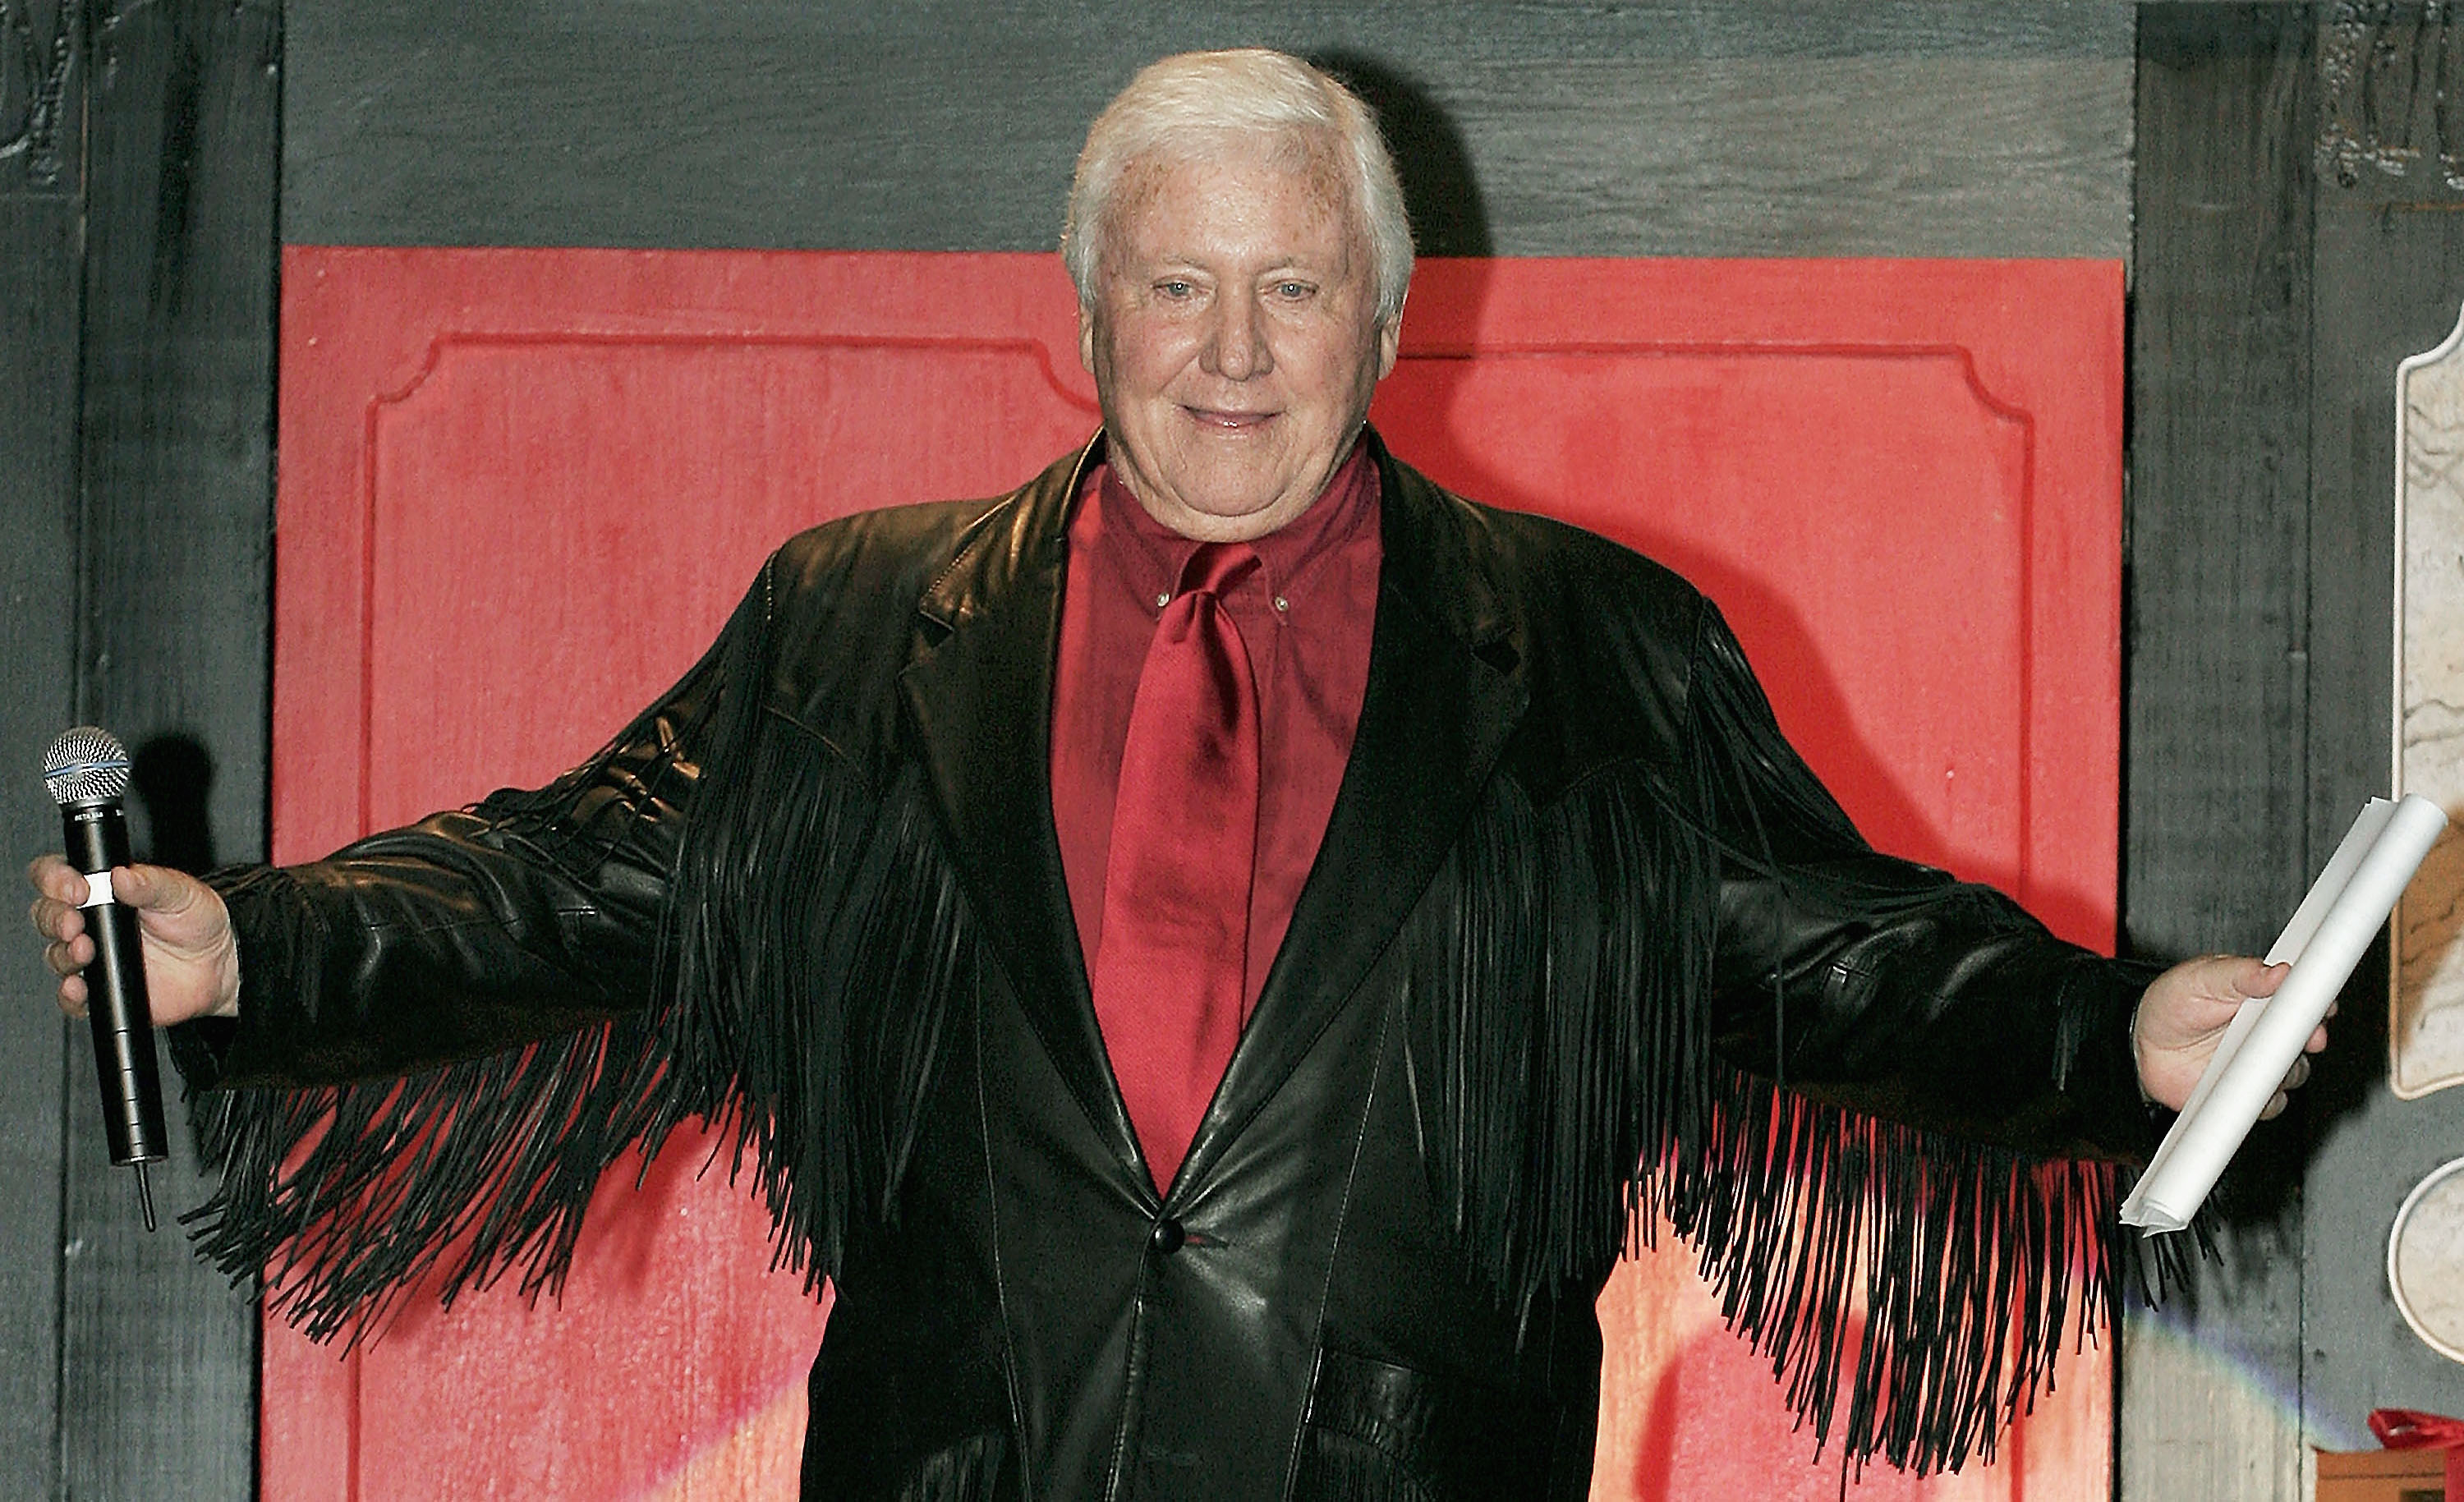 Merv Griffin at the Childhelp USA "Drive the Dream Gala" in Arizona 2005 | Source: Getty Images